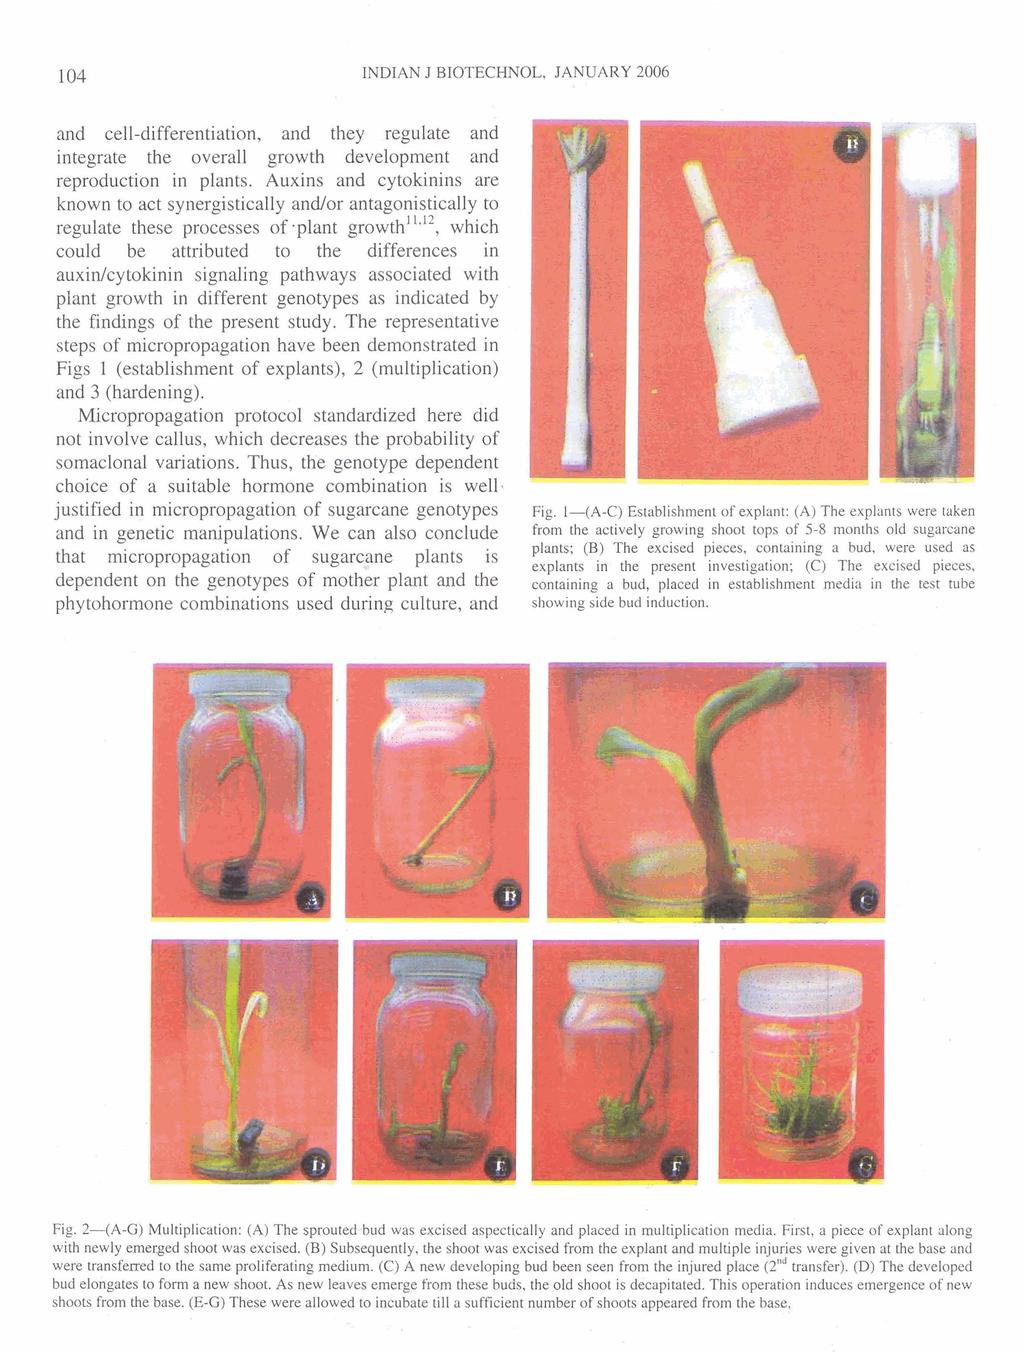 INDIAN J BIOTECHNOL, JANUARY 2006 and cell-differentiation, and they regulate and integrate the overall growth development and reproduction in plants.